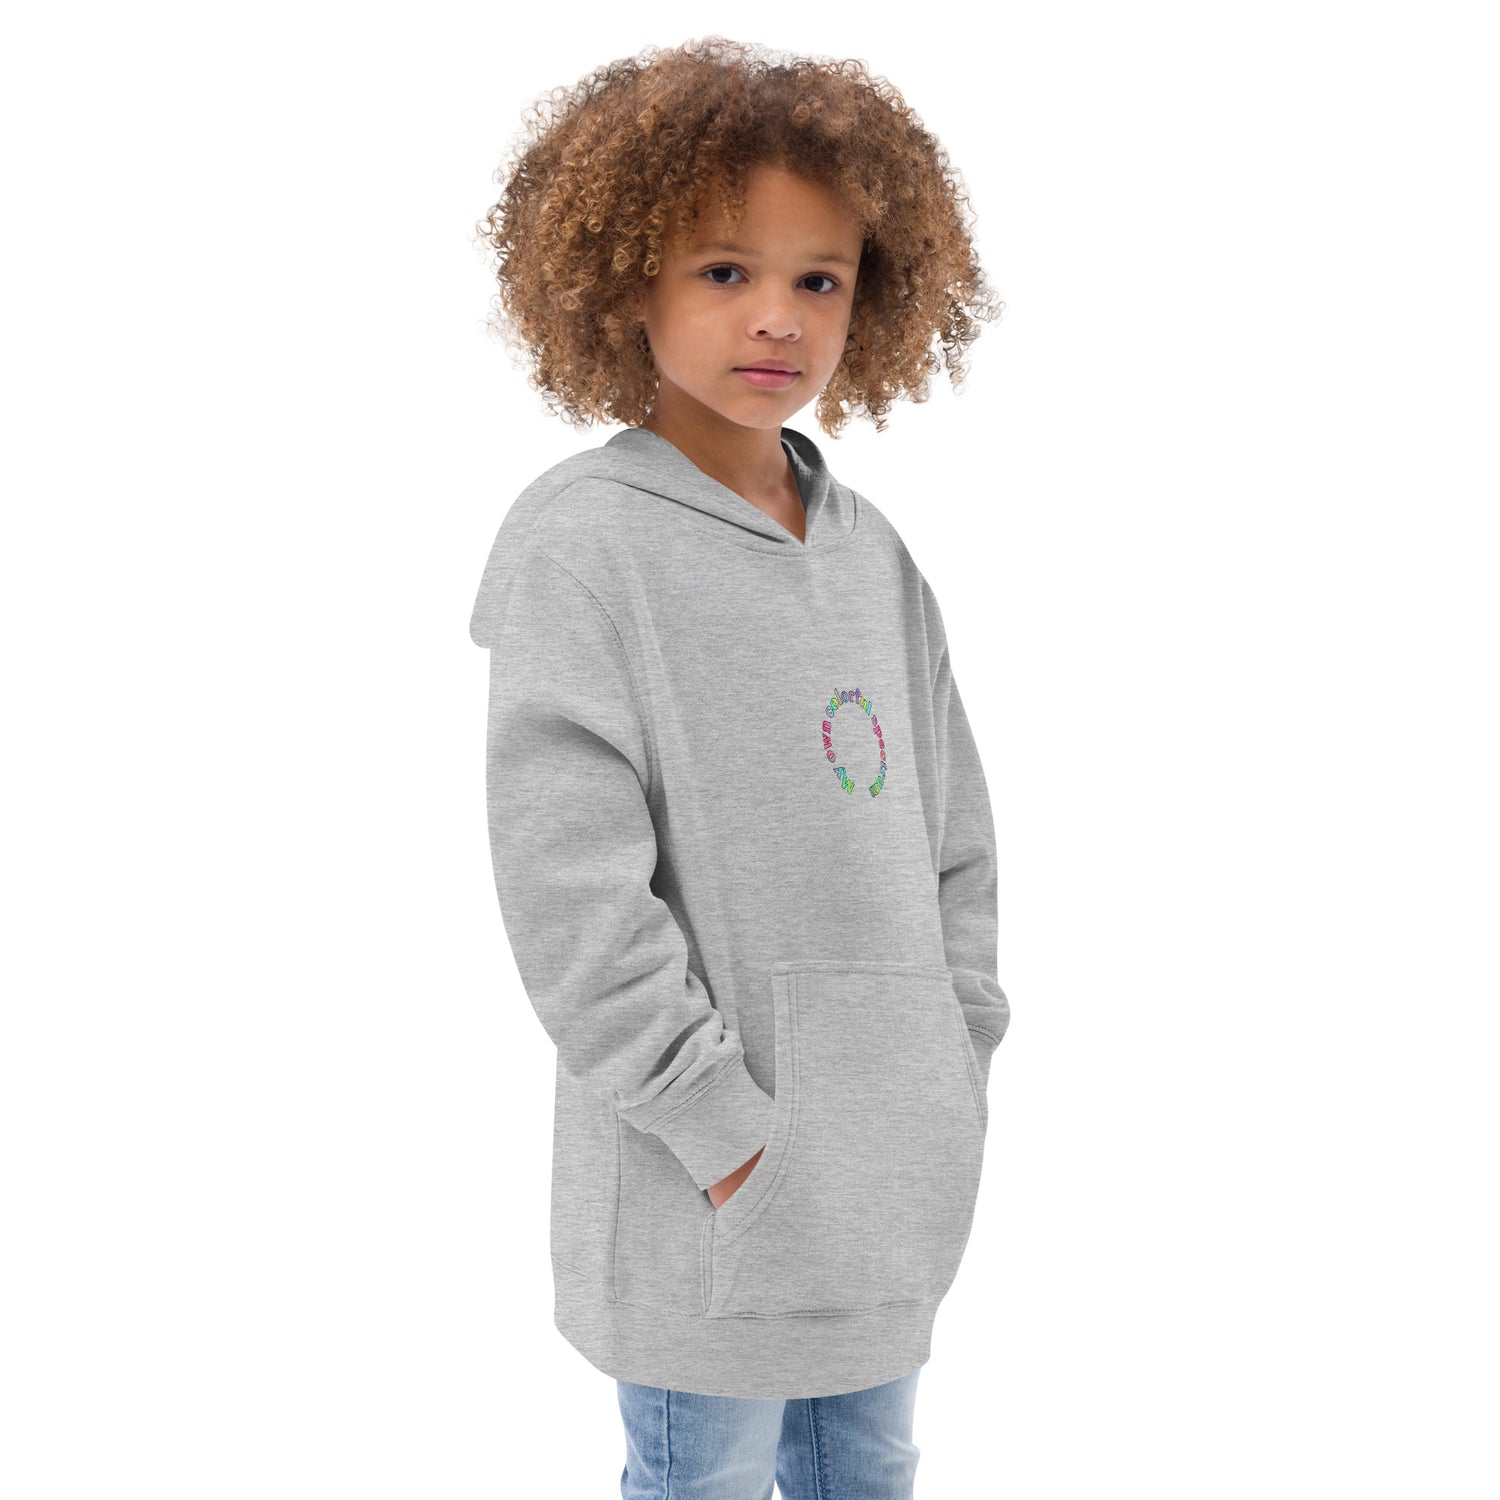 Right-front of grey kidswear hoodie with pockets, featuring " My own colorful spectrum" design.